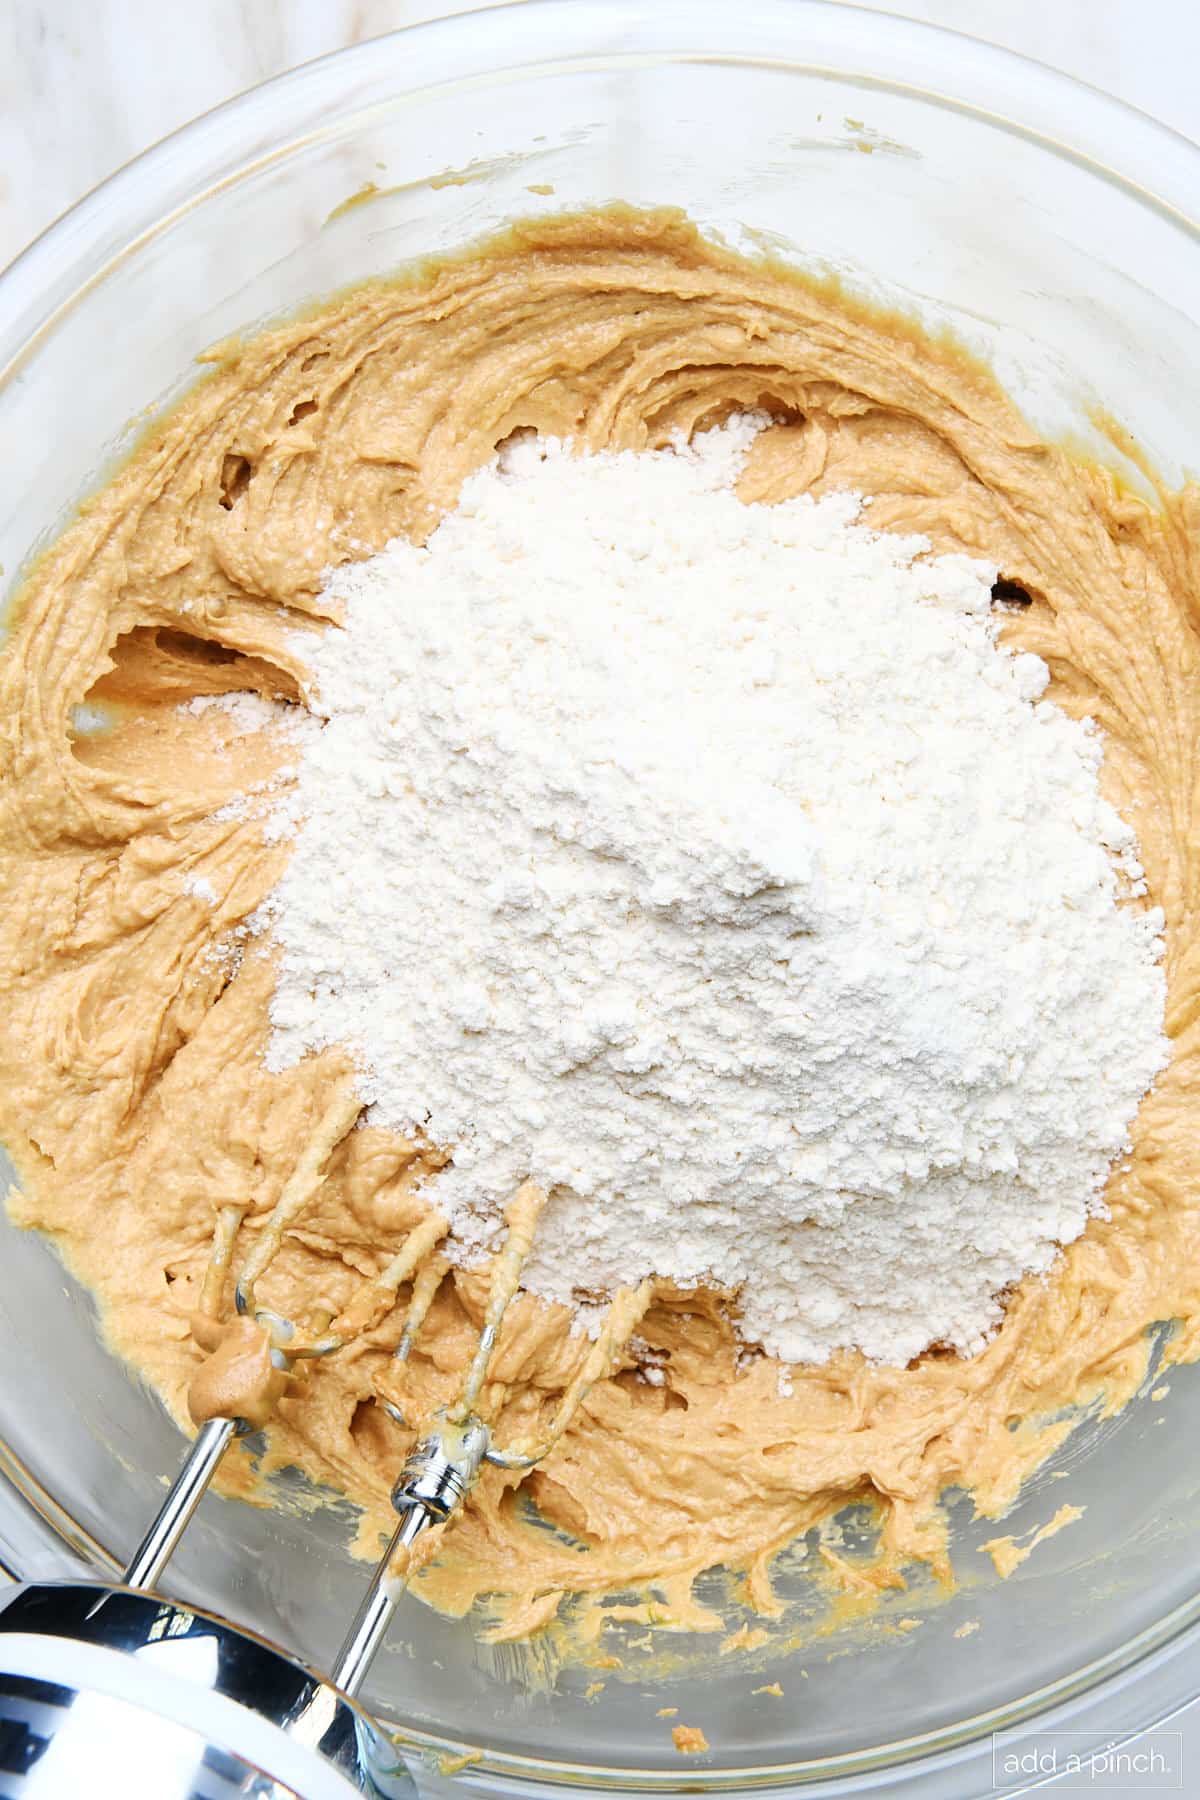 Peanut butter mixture with flour in mixing bowl.